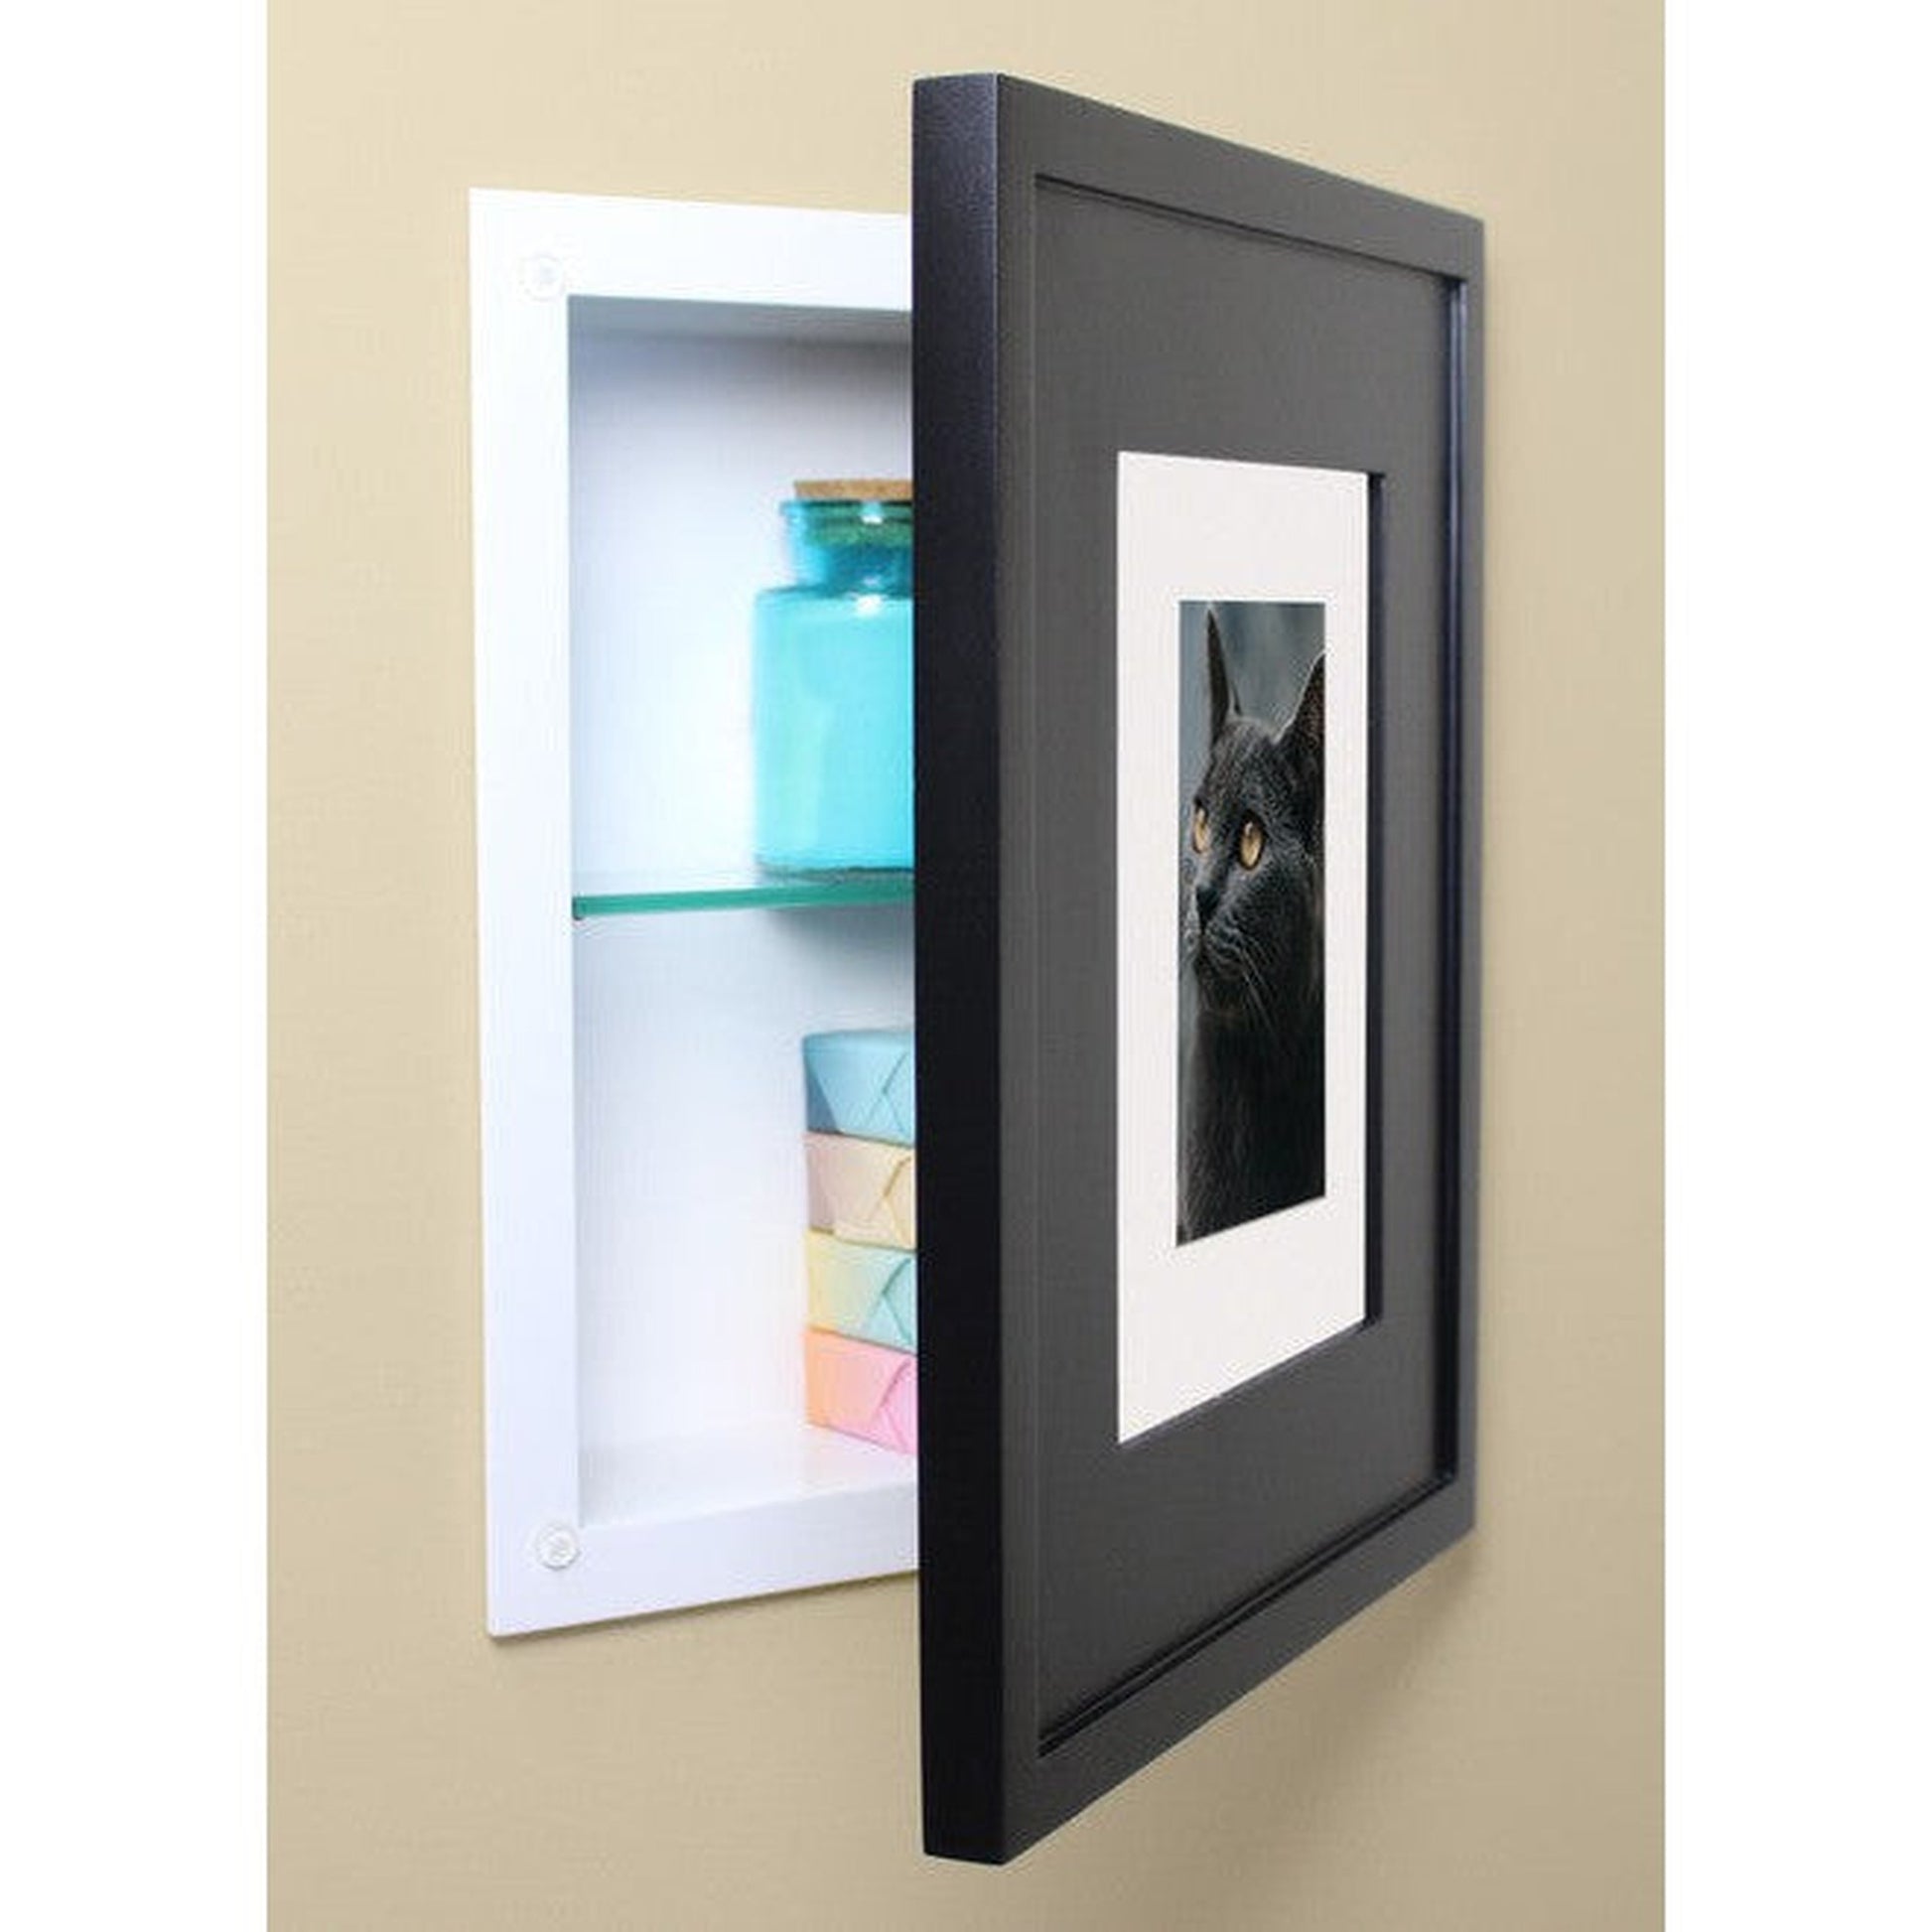 Fox Hollow Furnishings 11" x 14" Black Compact Portrait Special 3" Depth Recessed Picture Frame Medicine Cabinet With Ivory Matting